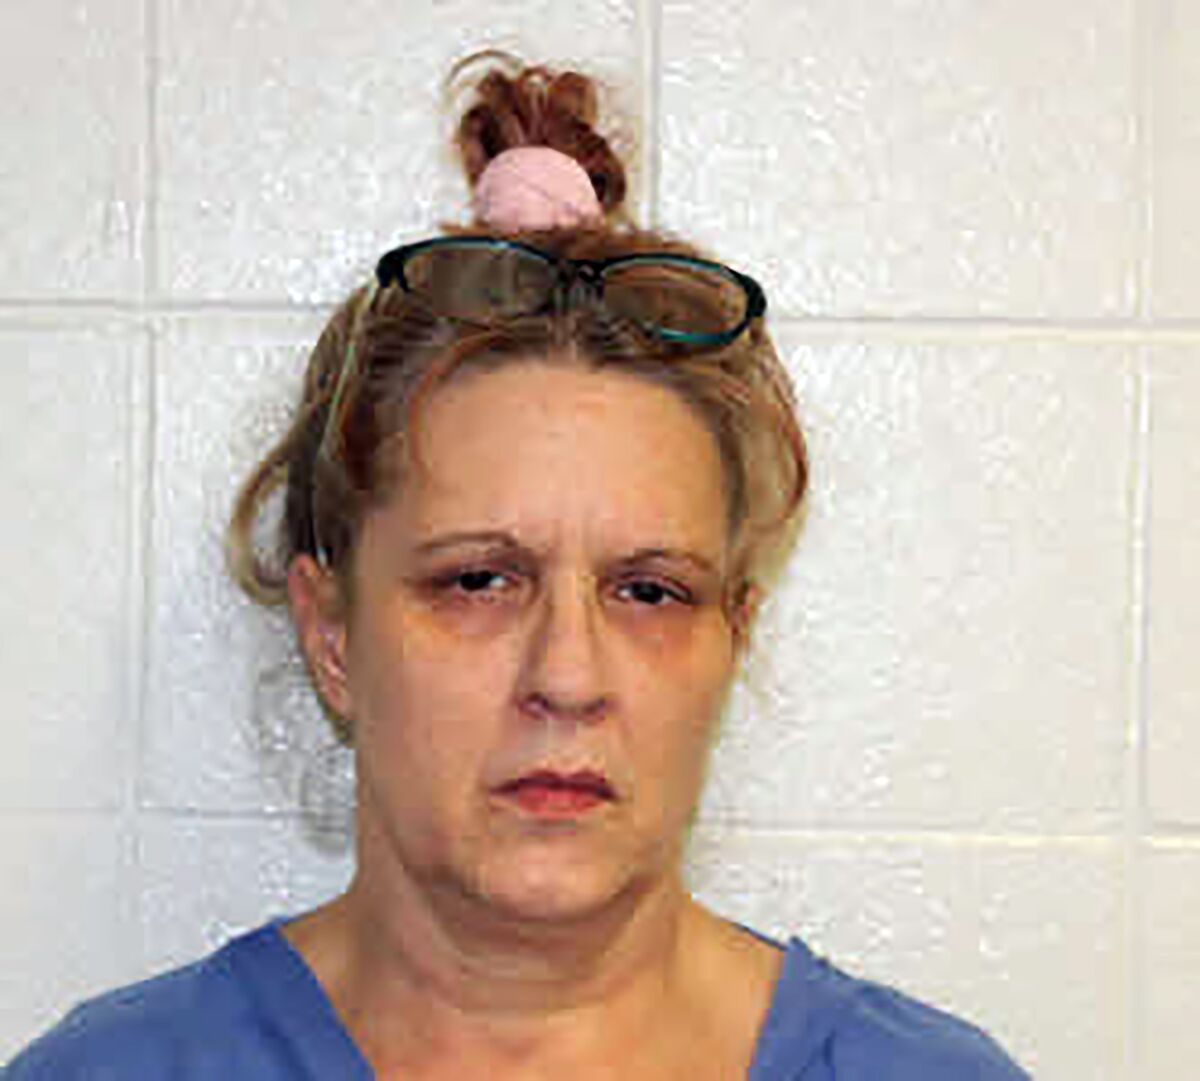 This image provided by the Avery County Sheriff’s Office shows Elizabeth Carserino. On Sunday, Aug. 8, 2021, Sheriff Kevin Frye announced that Carserino was taken into custody and charged with murder, identity theft, larceny of motor vehicle and financial card theft. Carserino was held at Avery County jail on secured bond of more than $1.6 million, the sheriff said. (Avery County Sheriff’s Office via AP)